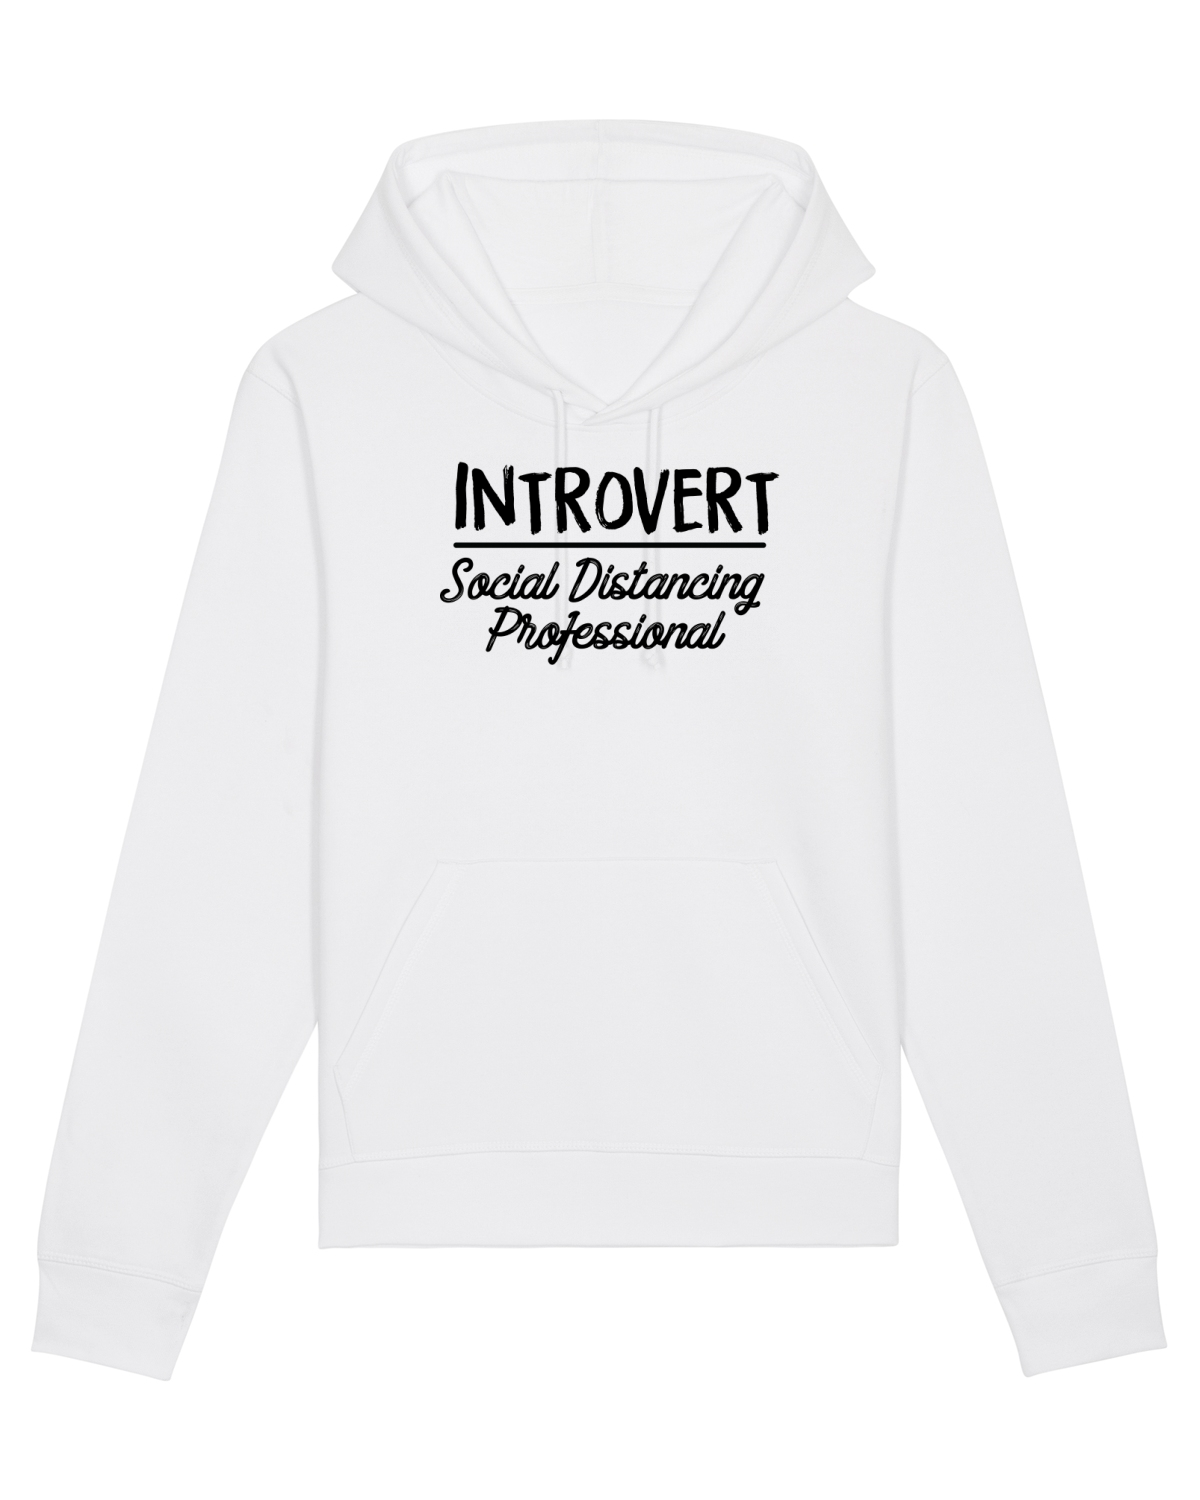 Introvert Social Distancing